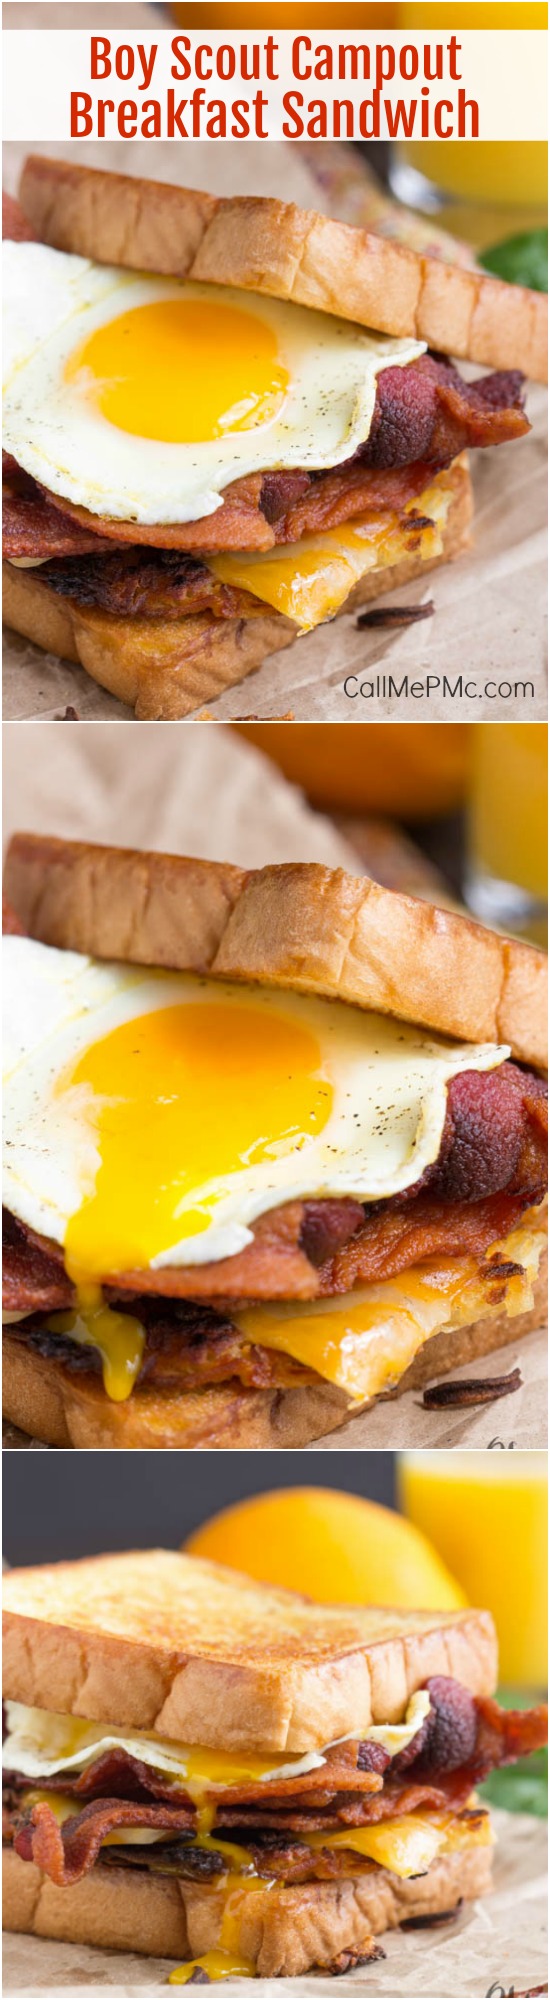 Camping foodl Boy Scout Campout Bacon Hash Brown Breakfast Sandwich recipe, this is a big, bad breakfast sandwich with all your favorite breakfast foods in one convenient, hand-held package!